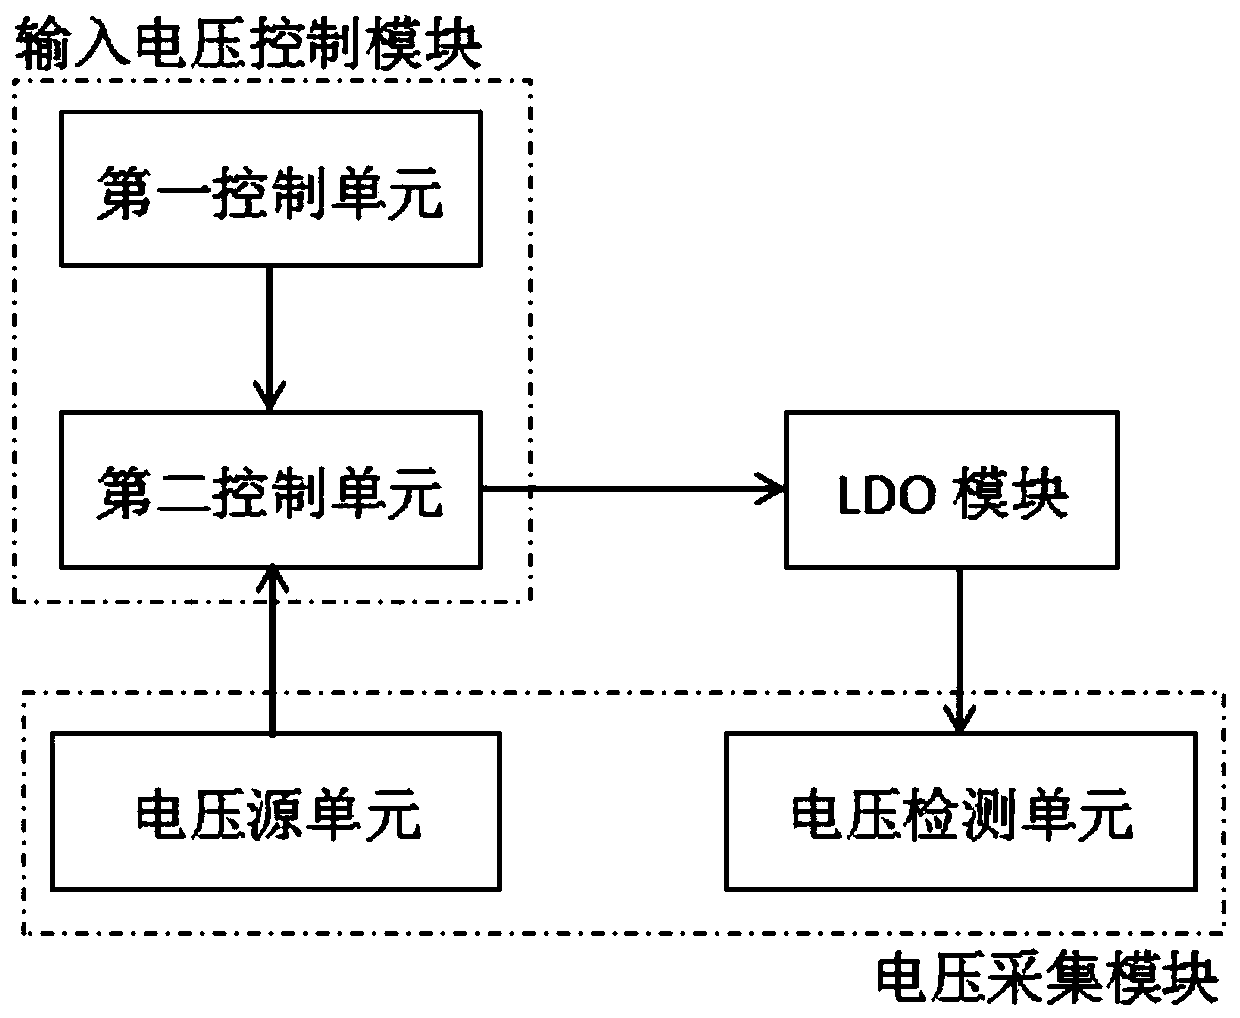 Method and circuit for inhibiting overshoot of LDO output voltage